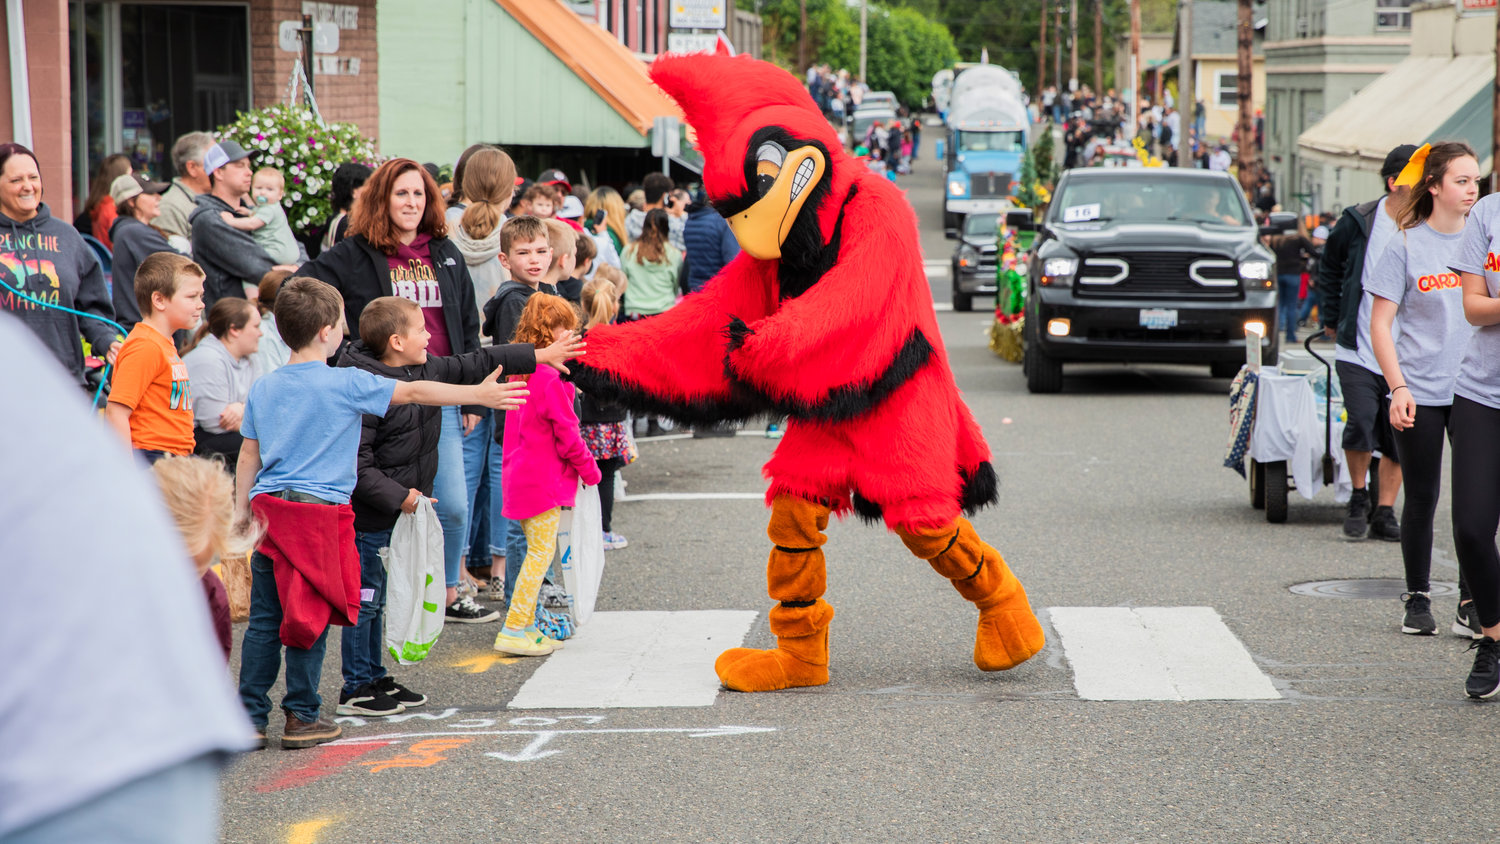 The Cardinal mascot gives out high-fives during the Egg Days Festival parade in Winlock on Saturday.